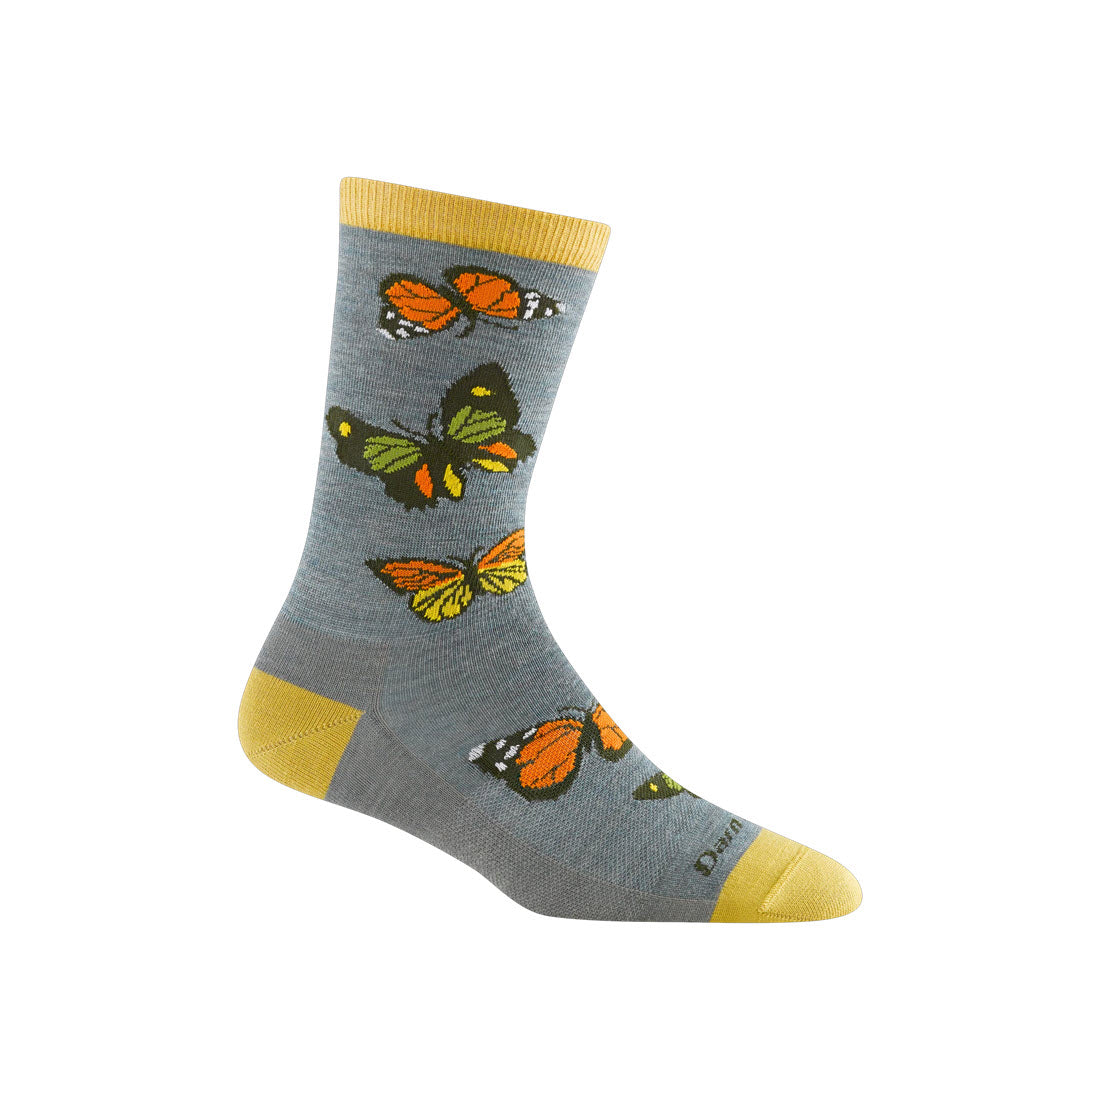 A single Seafoam Darn Tough women's flutter sock with a yellow toe and heel, decorated with a pattern of monarch butterflies.